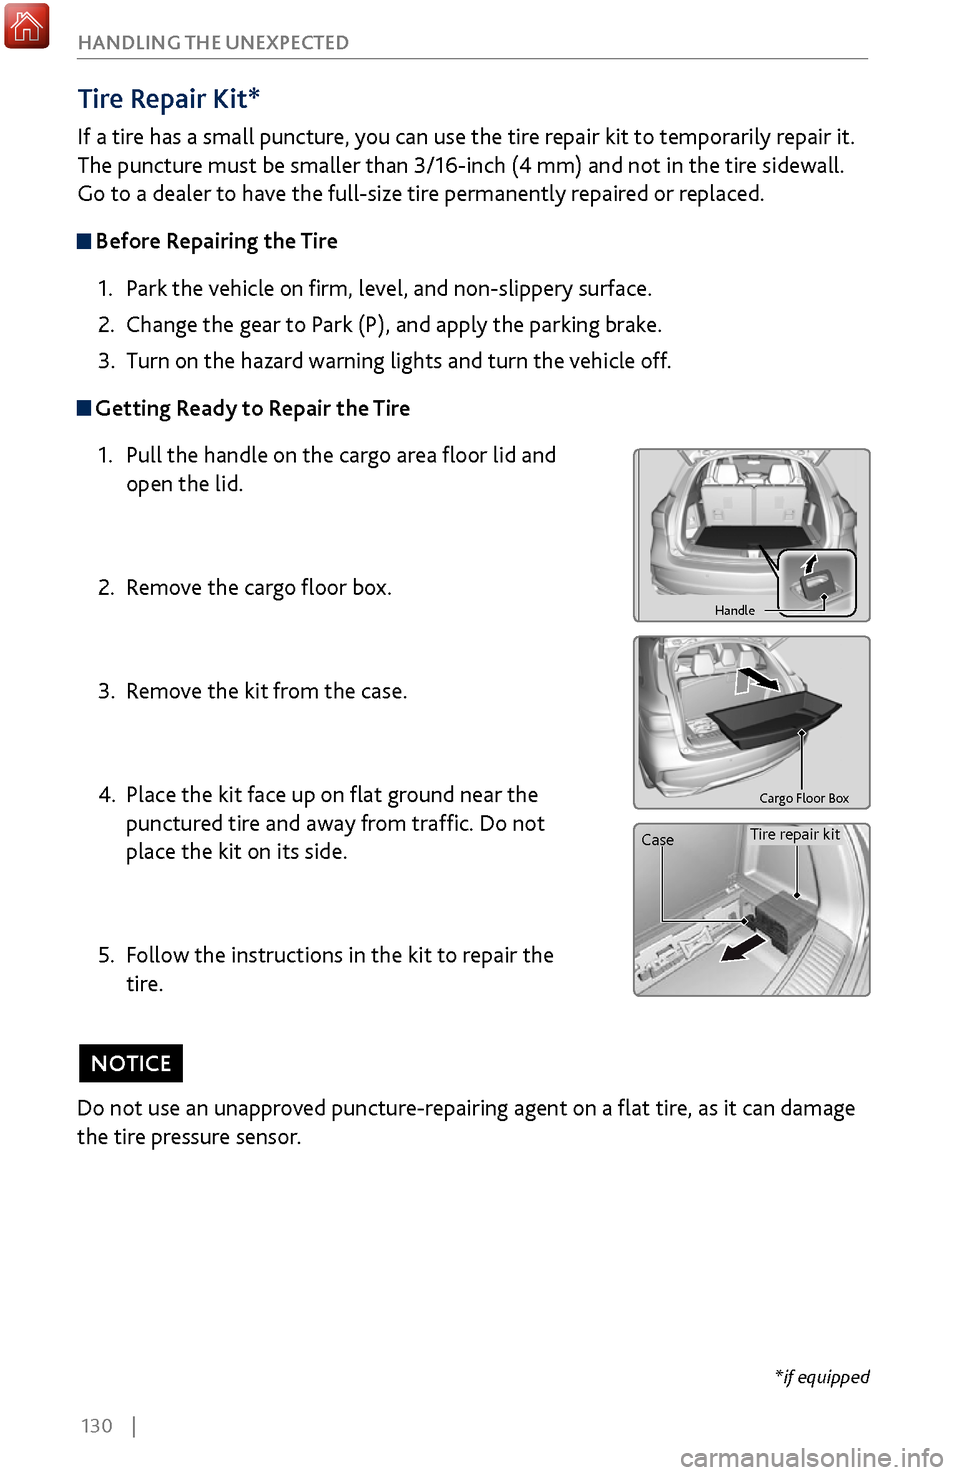 Acura MDX 2017  Owners Guide 130    |
HANDLING THE UNEXPECTED
Handle
Cargo 
Floor Box
Tire Repair Kit*
If a tire has a small puncture, you can use the tire repair kit to temporarily repair it. 
The puncture must be smaller than 3